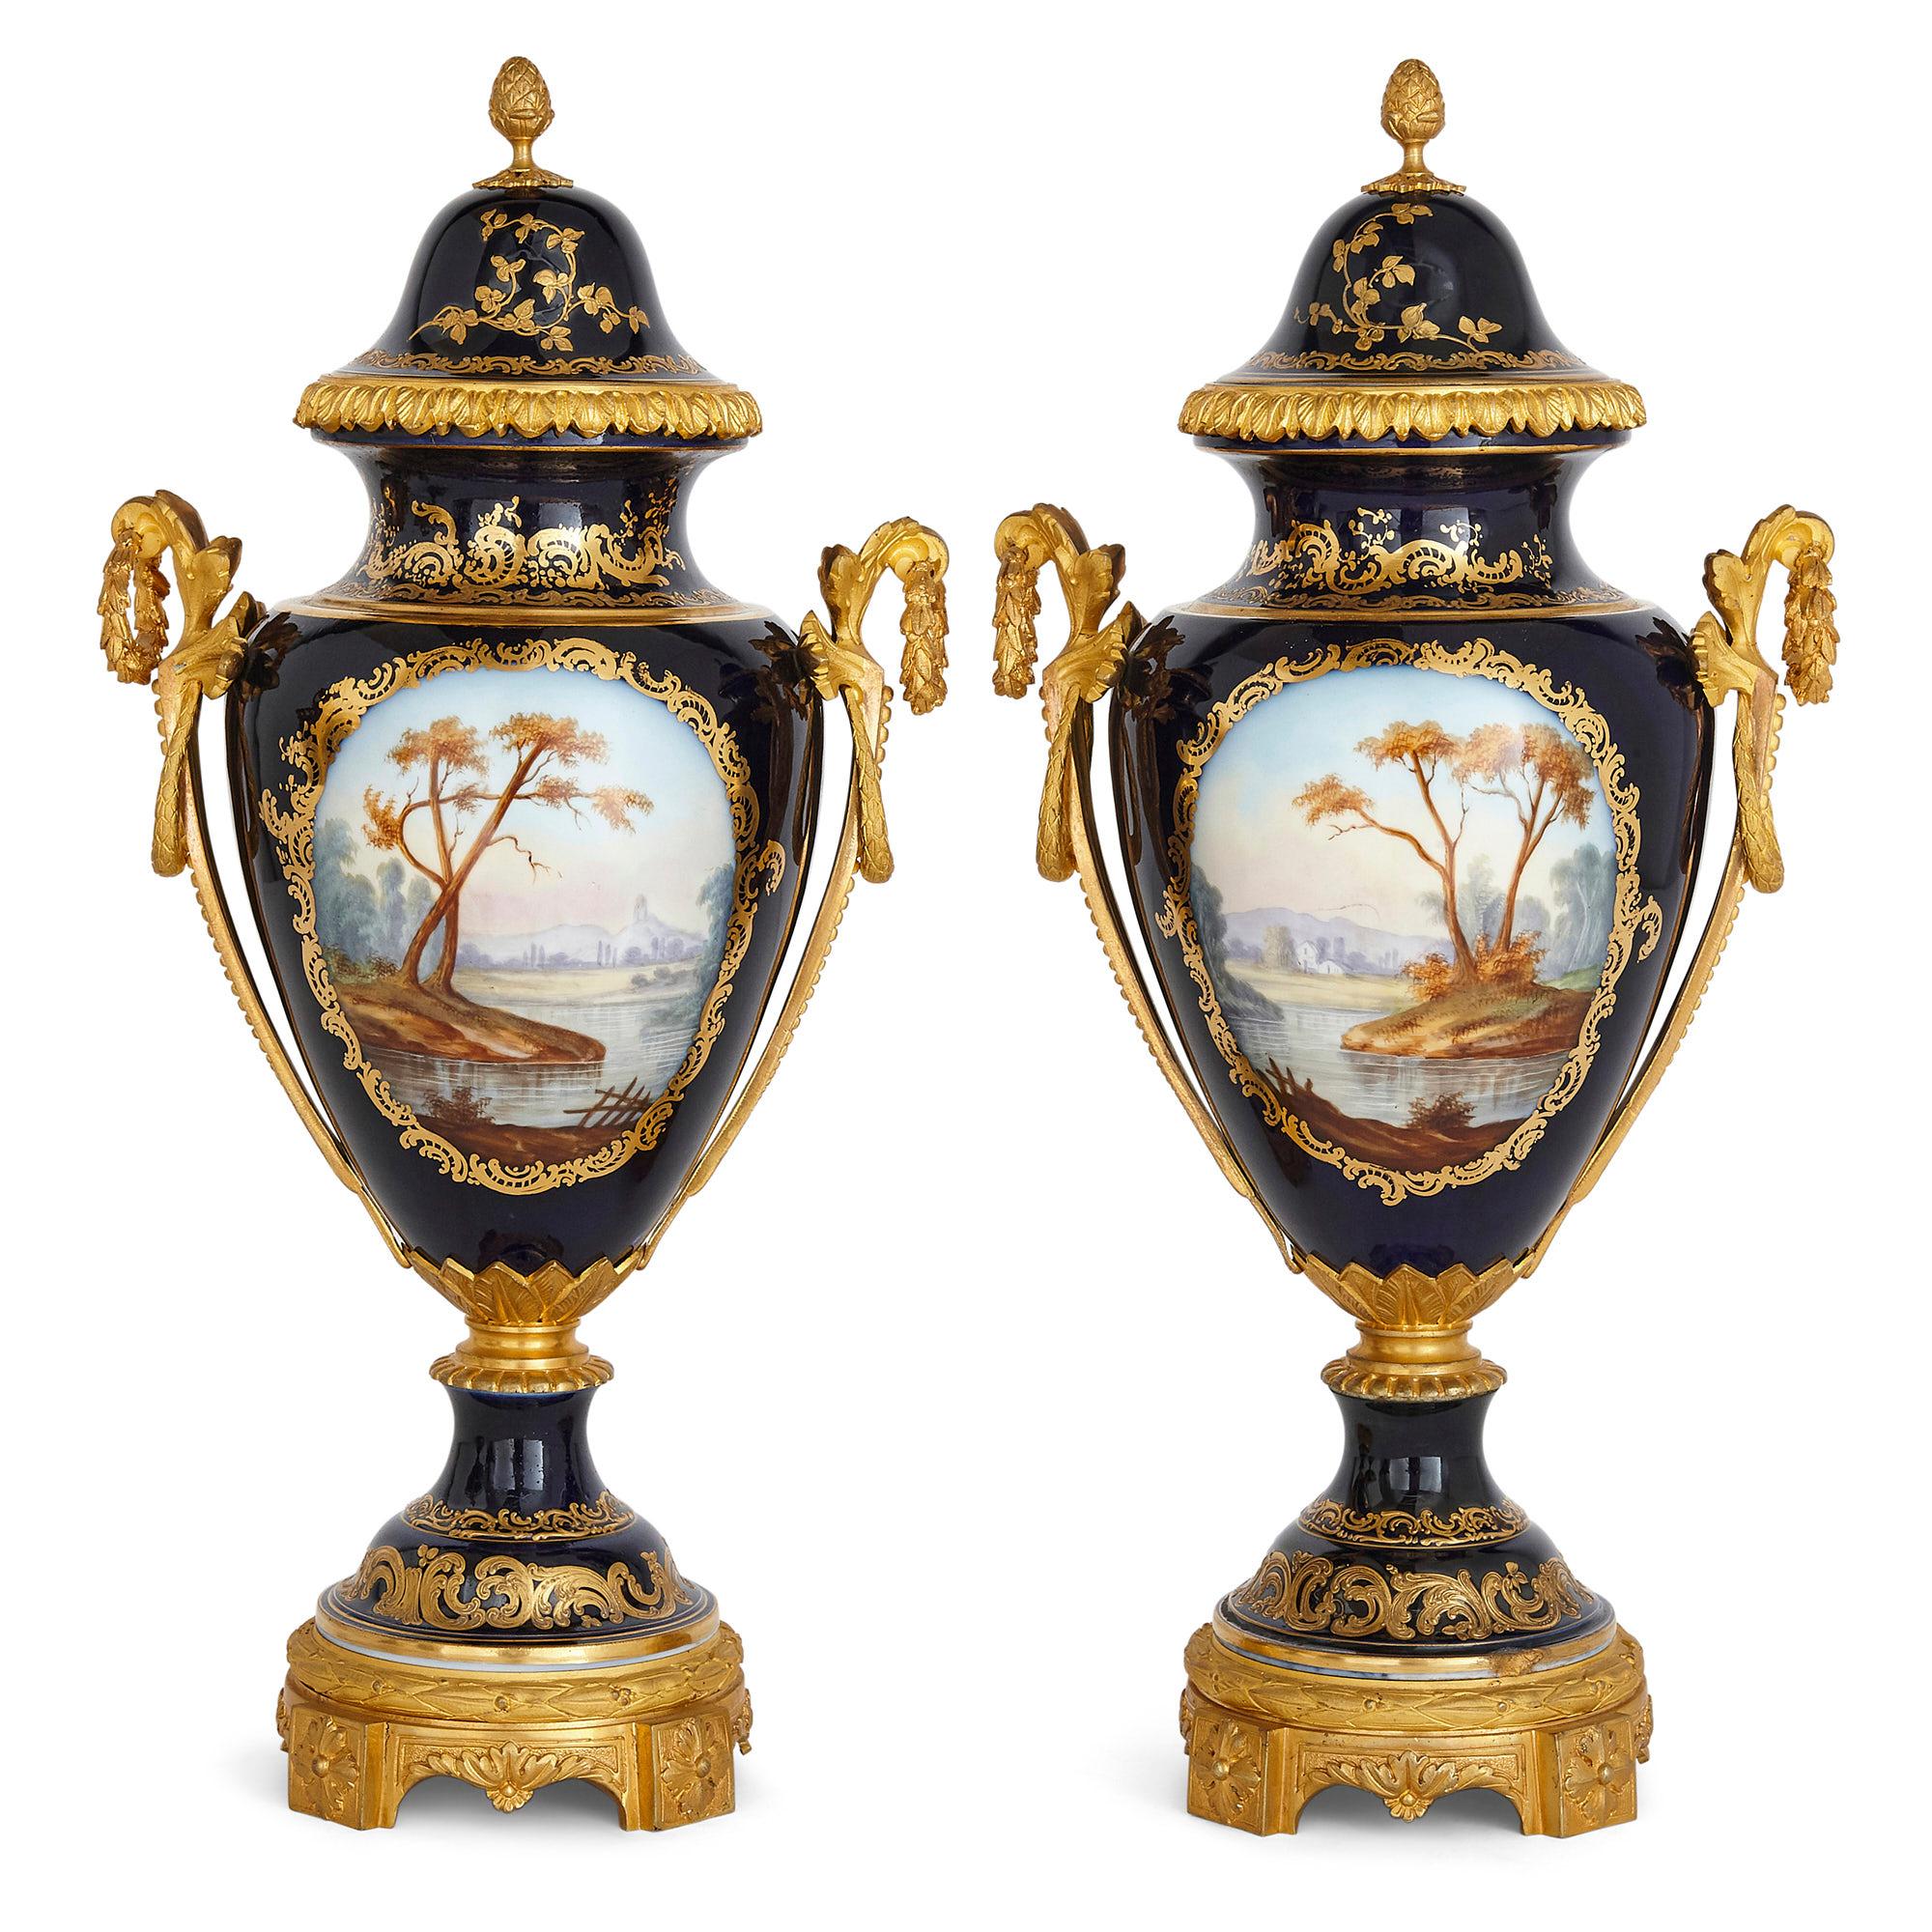 Antique Neoclassical Sèvres Style Porcelain and Gilt Bronze Jardinière and Vases In Good Condition For Sale In London, GB